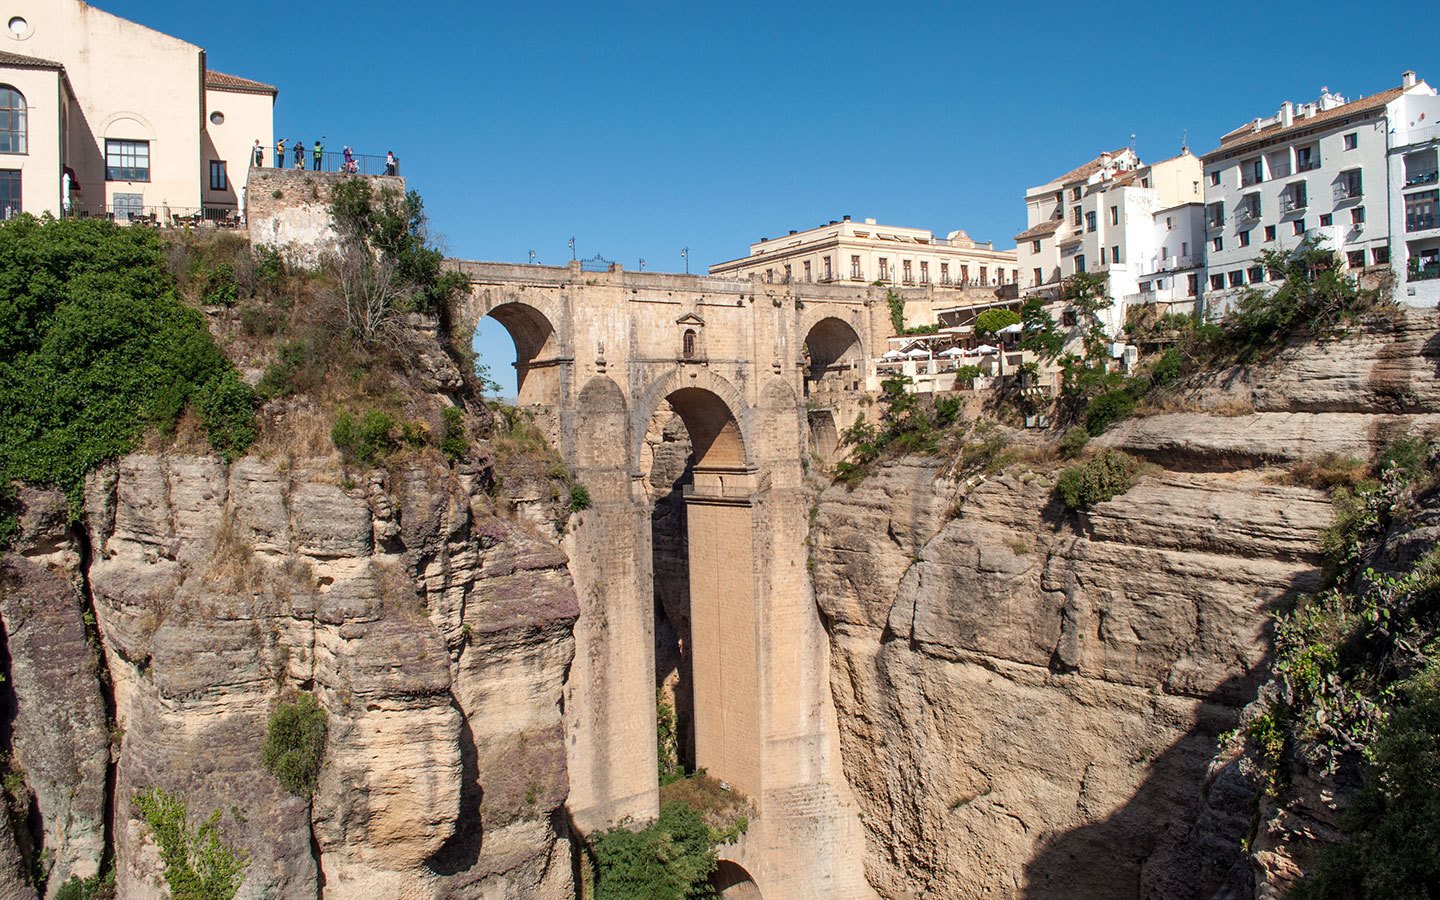 Bridges and baths: The best things to do in Ronda, Spain